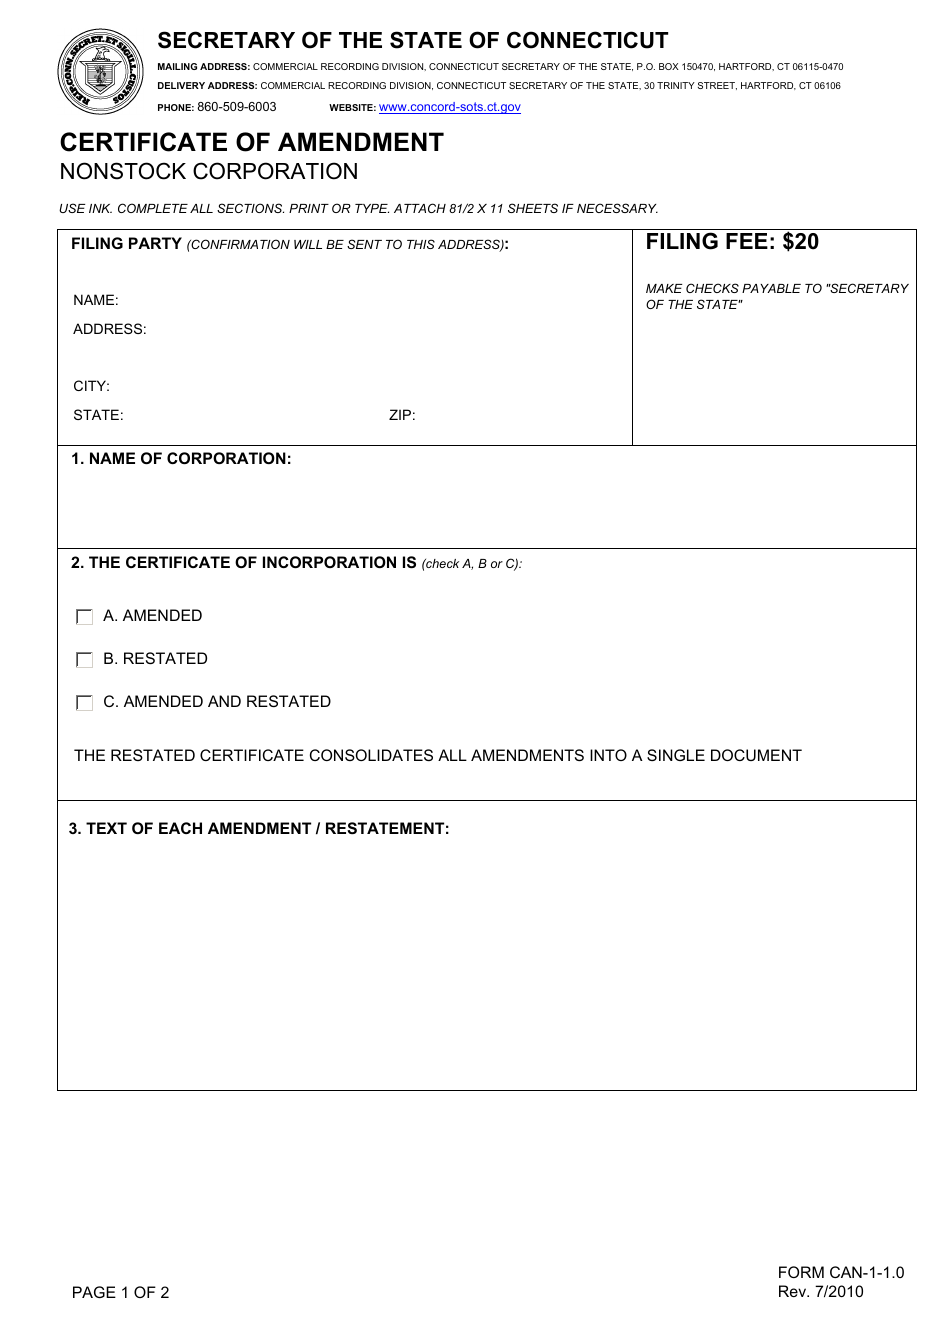 Form CAN-1-1.0 Certificate of Amendment - Nonstock Corporation - Connecticut, Page 1